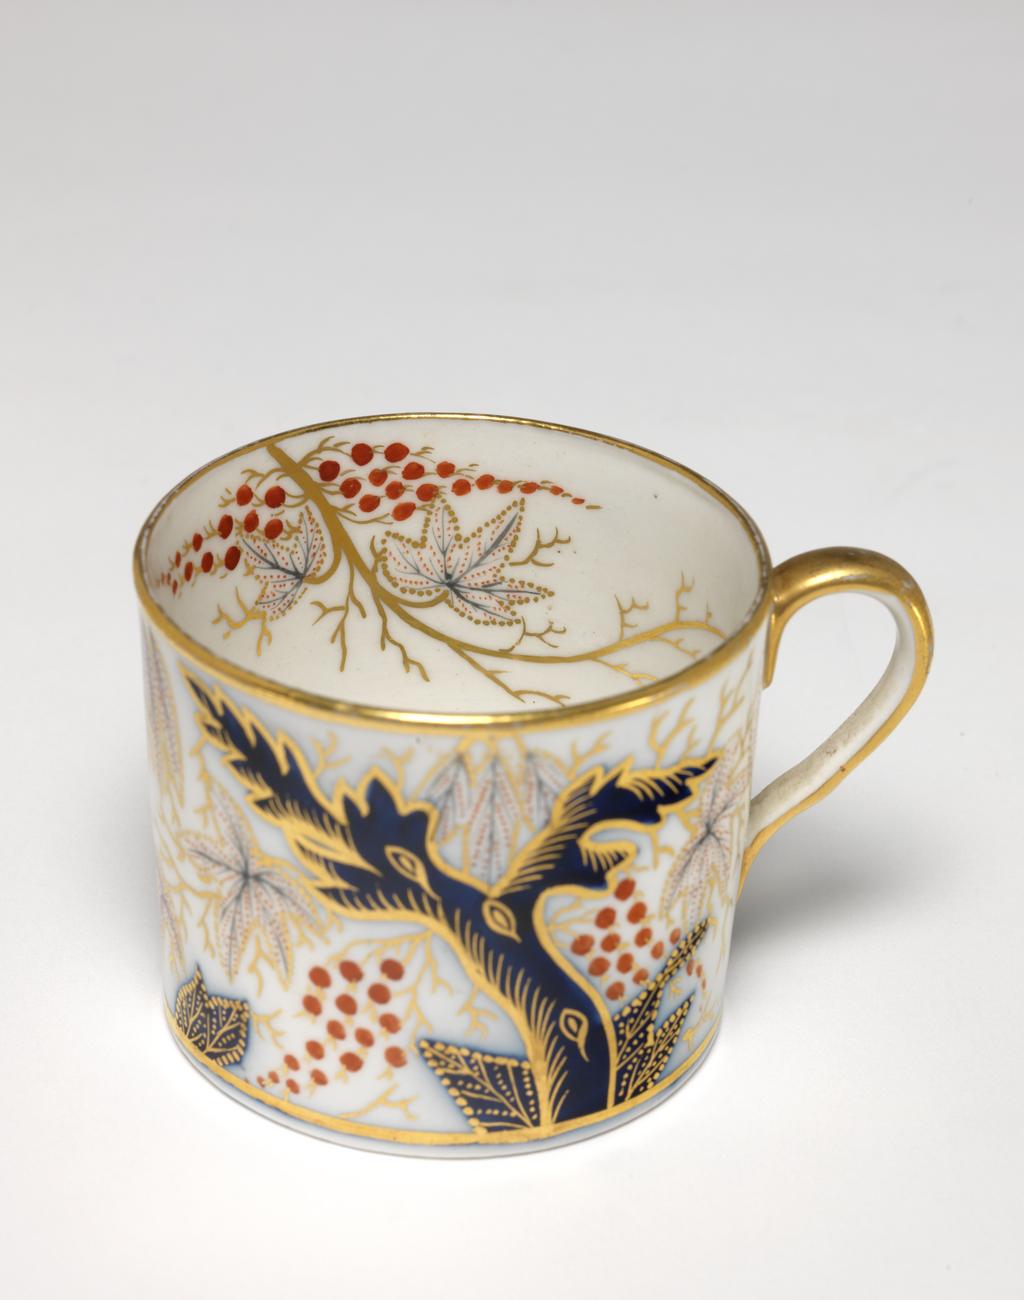 An image of Coffee cup and saucer. New Hall Porcelain Factory, Staffordshire. Cylindrical coffee can with loop handle. Circular saucer with curved sides, standing on a footring. The cup is decorated on the exterior with a blue tree, with foliage dotted in blue and red, and with two bunches of red berries, and gold tendrils, repeated on the other side. Inside there are two gold branches, each with two dotted leaves, and two bunches of red berries. There are gold bands round the rim and base and the back of the handle is gilded. The saucer has a central gold-edged medallion containing a plant, surrounded by the pattern on the exterior of the cup. The edge is encircled by a gold band. Pattern no. 372. Hybrid hard-paste porcelain, painted underglaze in enamels,  decoration in cobalt blue, and gilded, height, cup, 5.9 cm, width, cup, 8.8 cm, diameter, cup, 6.8 cm, height, saucer, 3.1 cm, diameter, saucer, 13.6 cm, circa 1795-1800. Oriental Style.